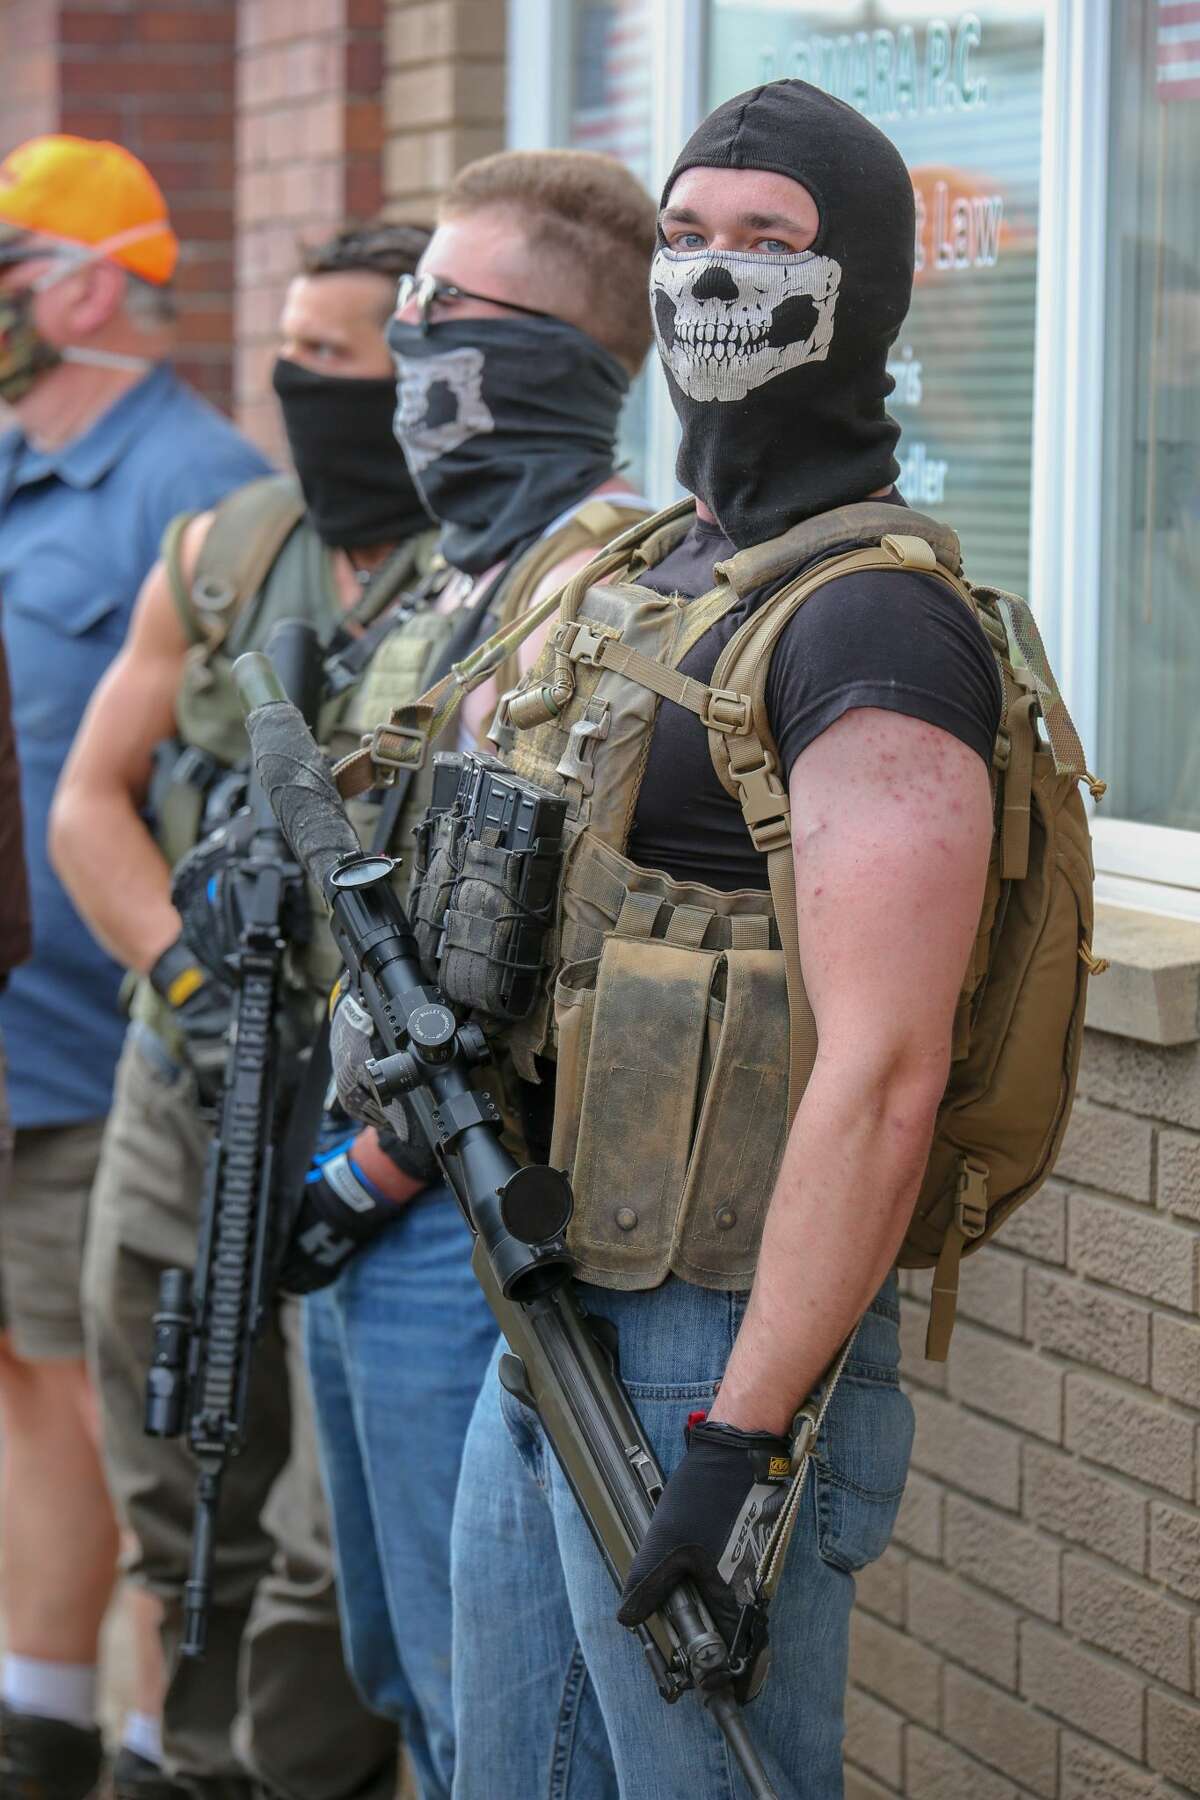 Huron Daily Tribune photos from a Black Lives Matter rally in Bad Axe on Friday, June 5, 2020 include images of men holding weapons among those in attendance.